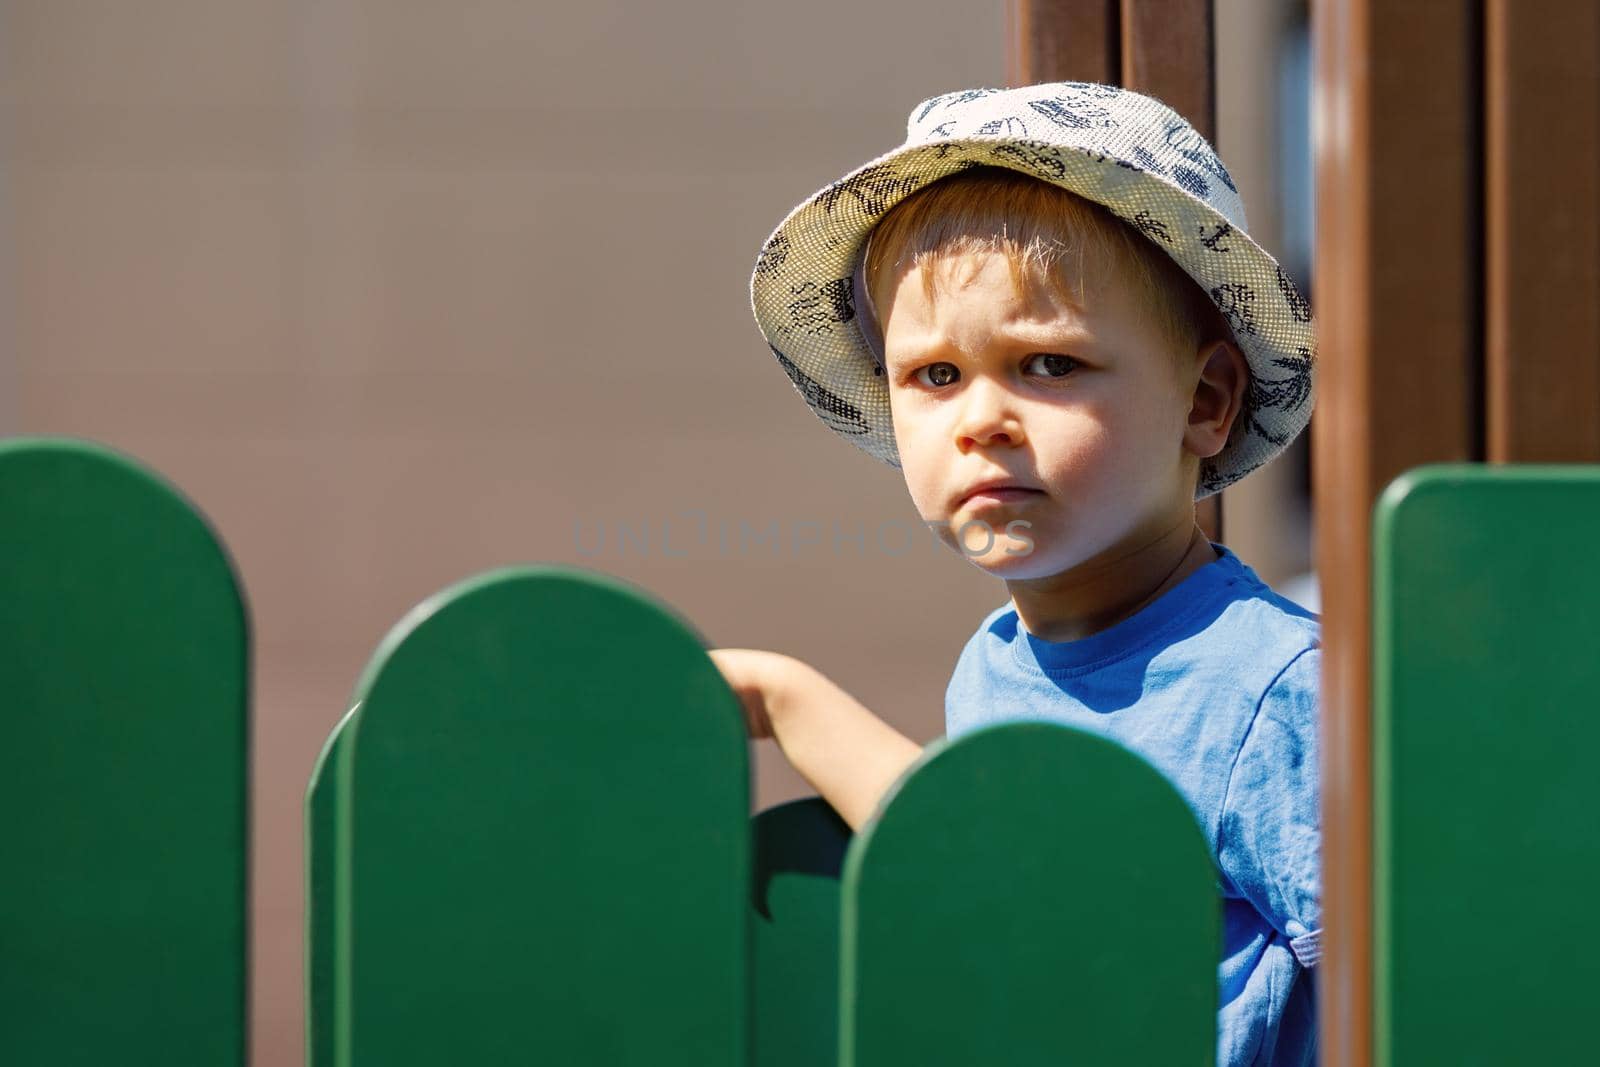 Little caucasian preschool boy with hat playing in playground in city public park near green fence